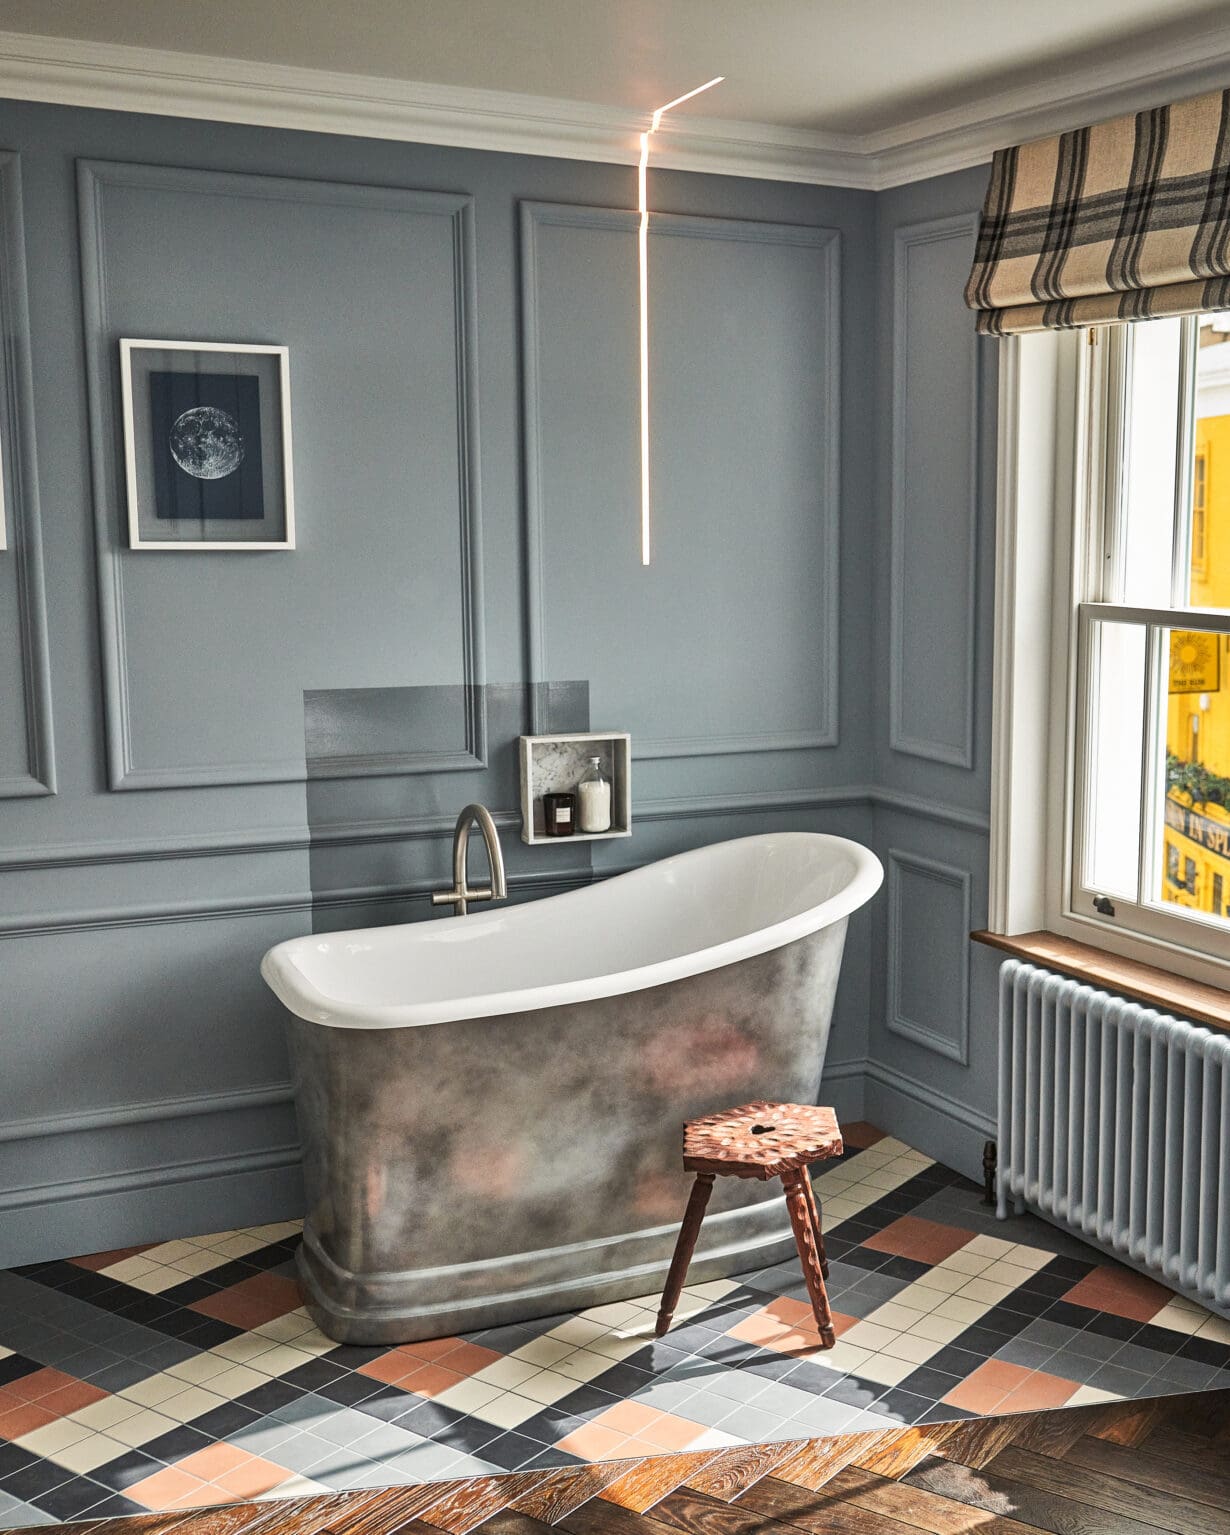 The Lost Poet, Notting Hill London | A silver freestanding tub on a tiled floor